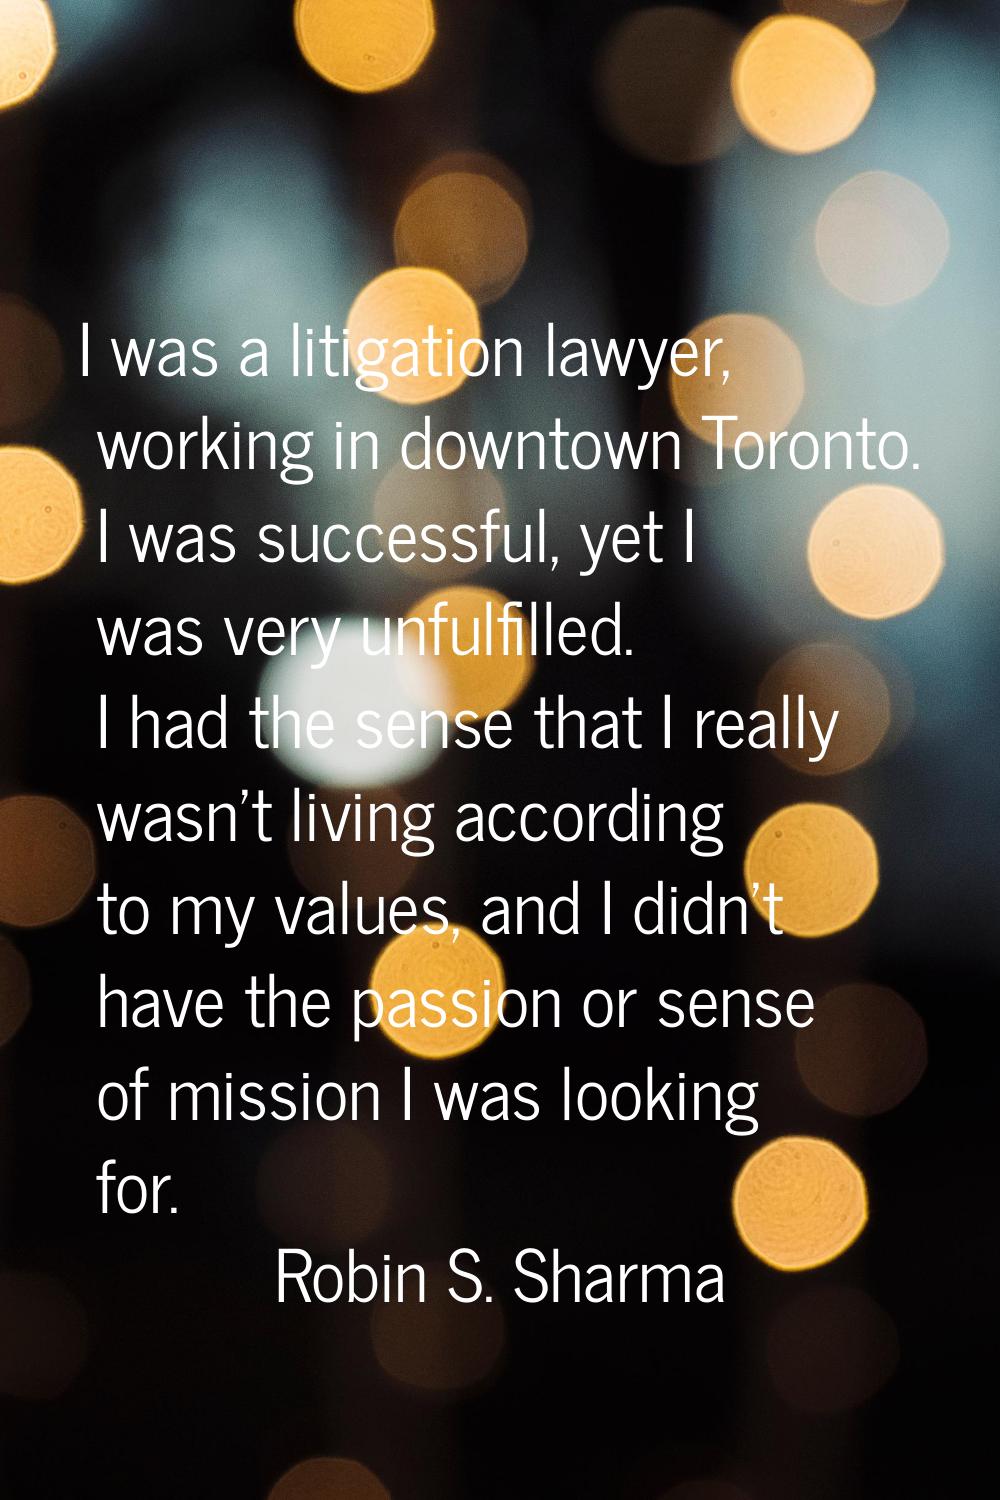 I was a litigation lawyer, working in downtown Toronto. I was successful, yet I was very unfulfille